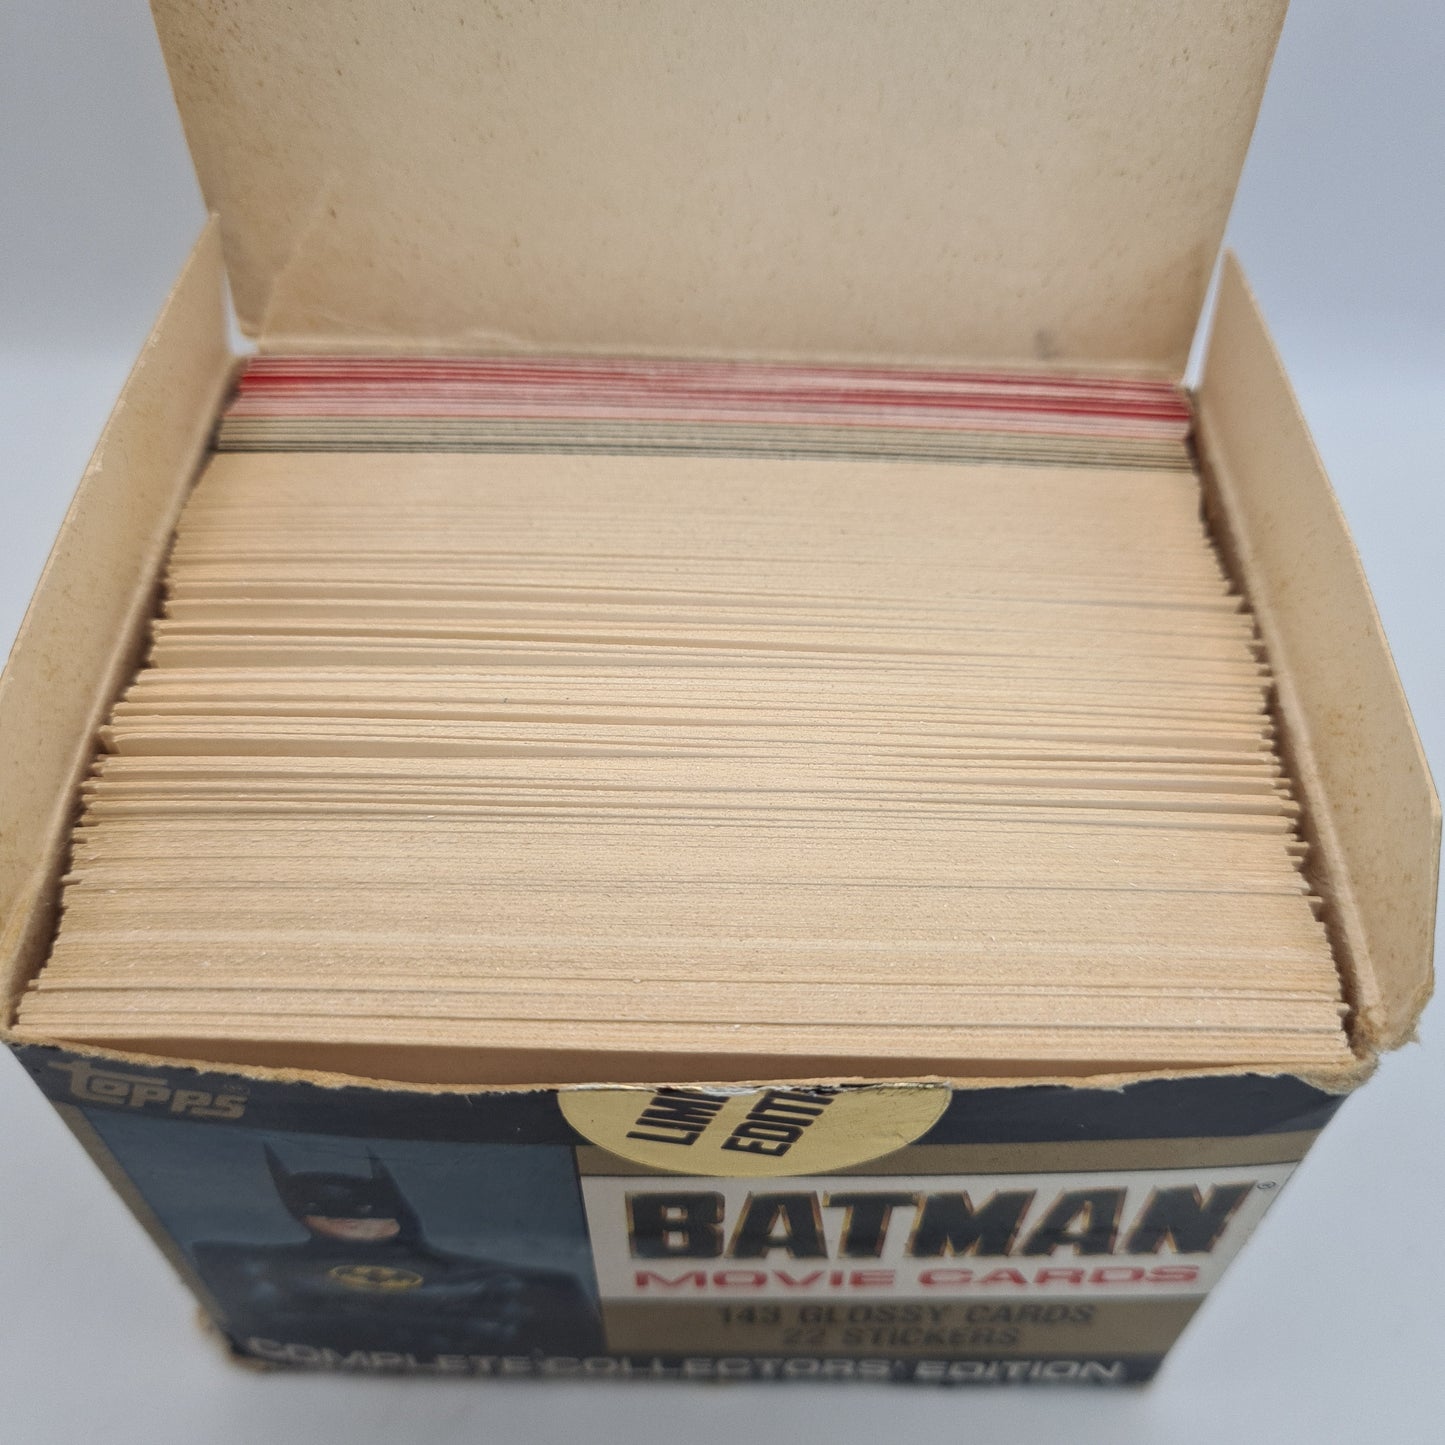 Batman Glossy Movie Cards Complete Collection Topps W10